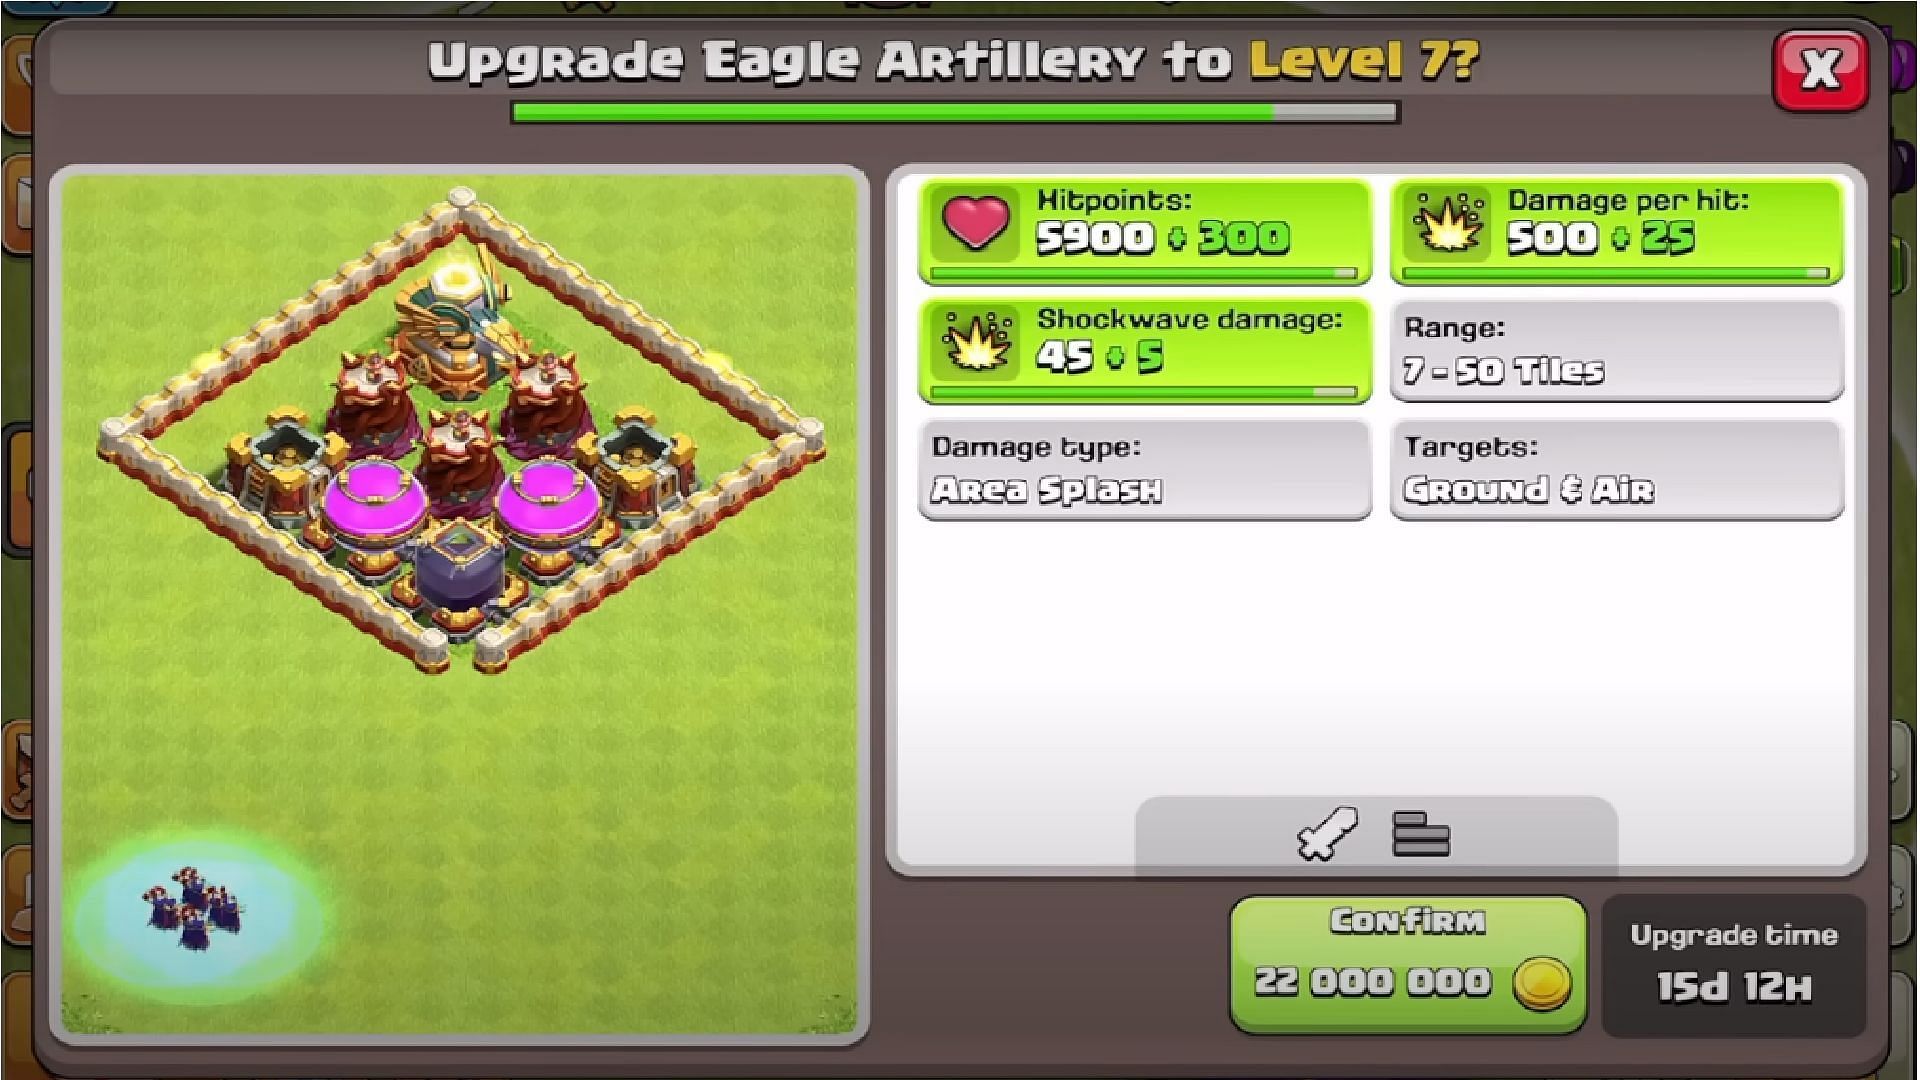 Eagle Artillery got a new level in this update. (Image via Supercell)